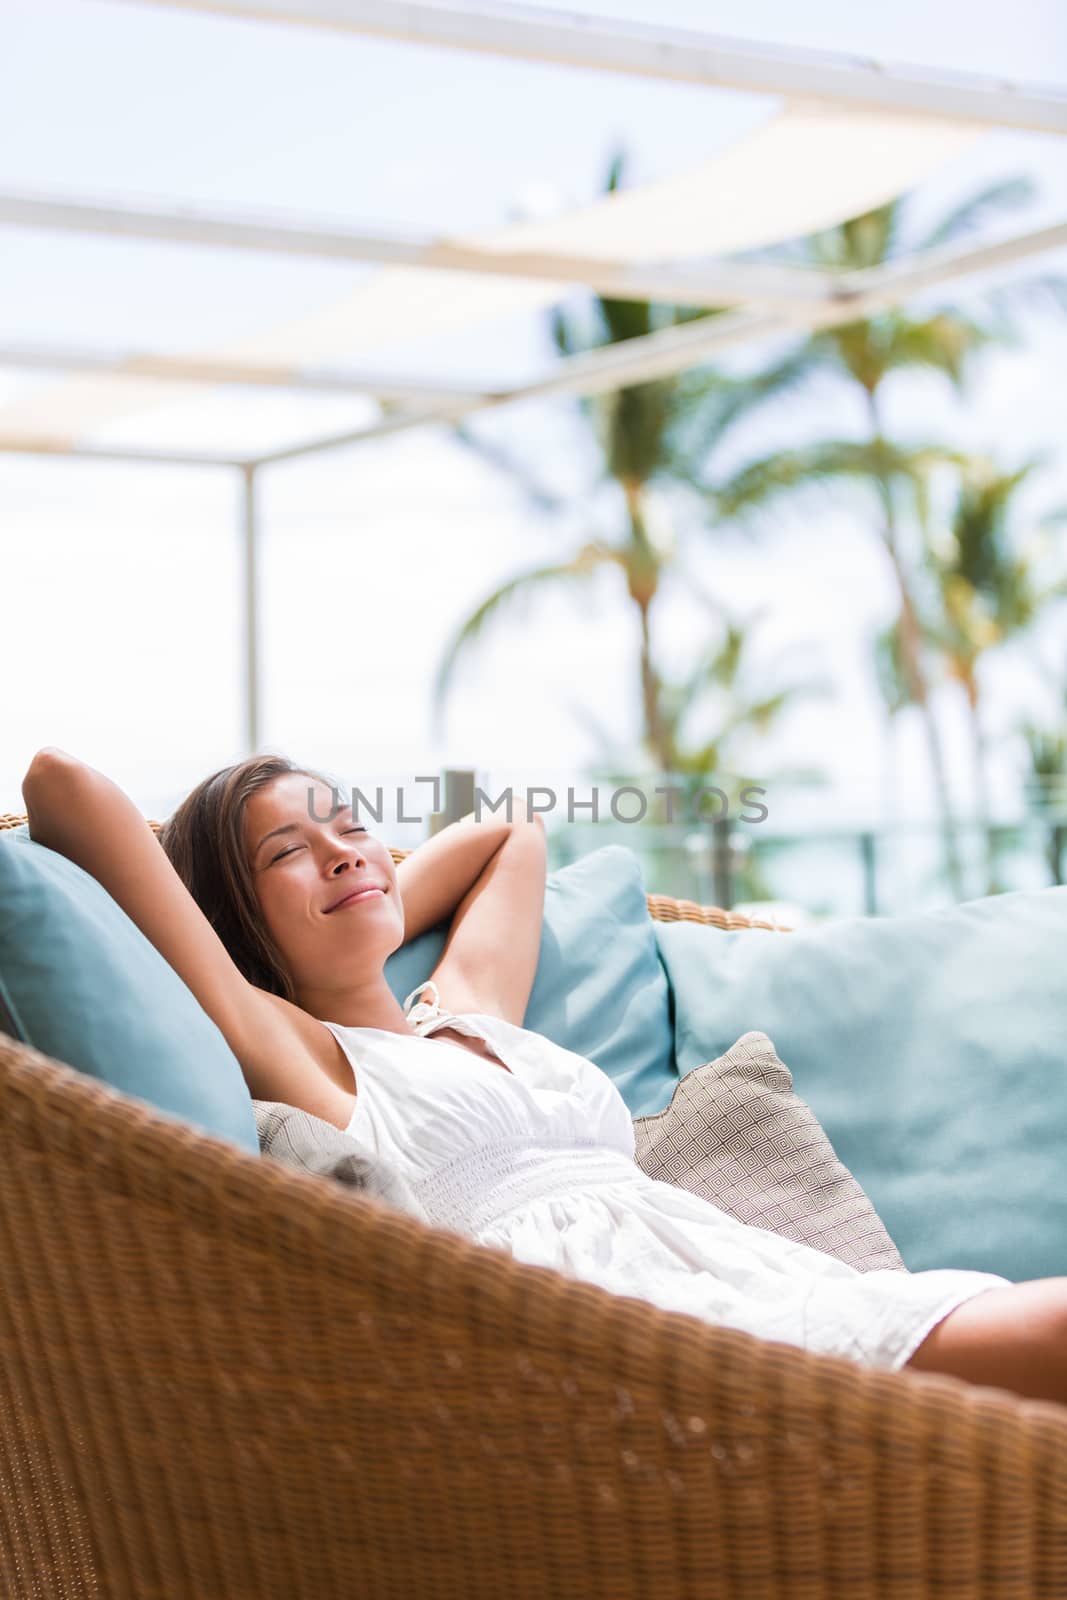 Luxury hotel lifestyle woman relaxing sleeping enjoying luxury sofa on outdoor patio living room. Happy lady lying down on comfortable pillows taking a nap for wellness and health by Maridav